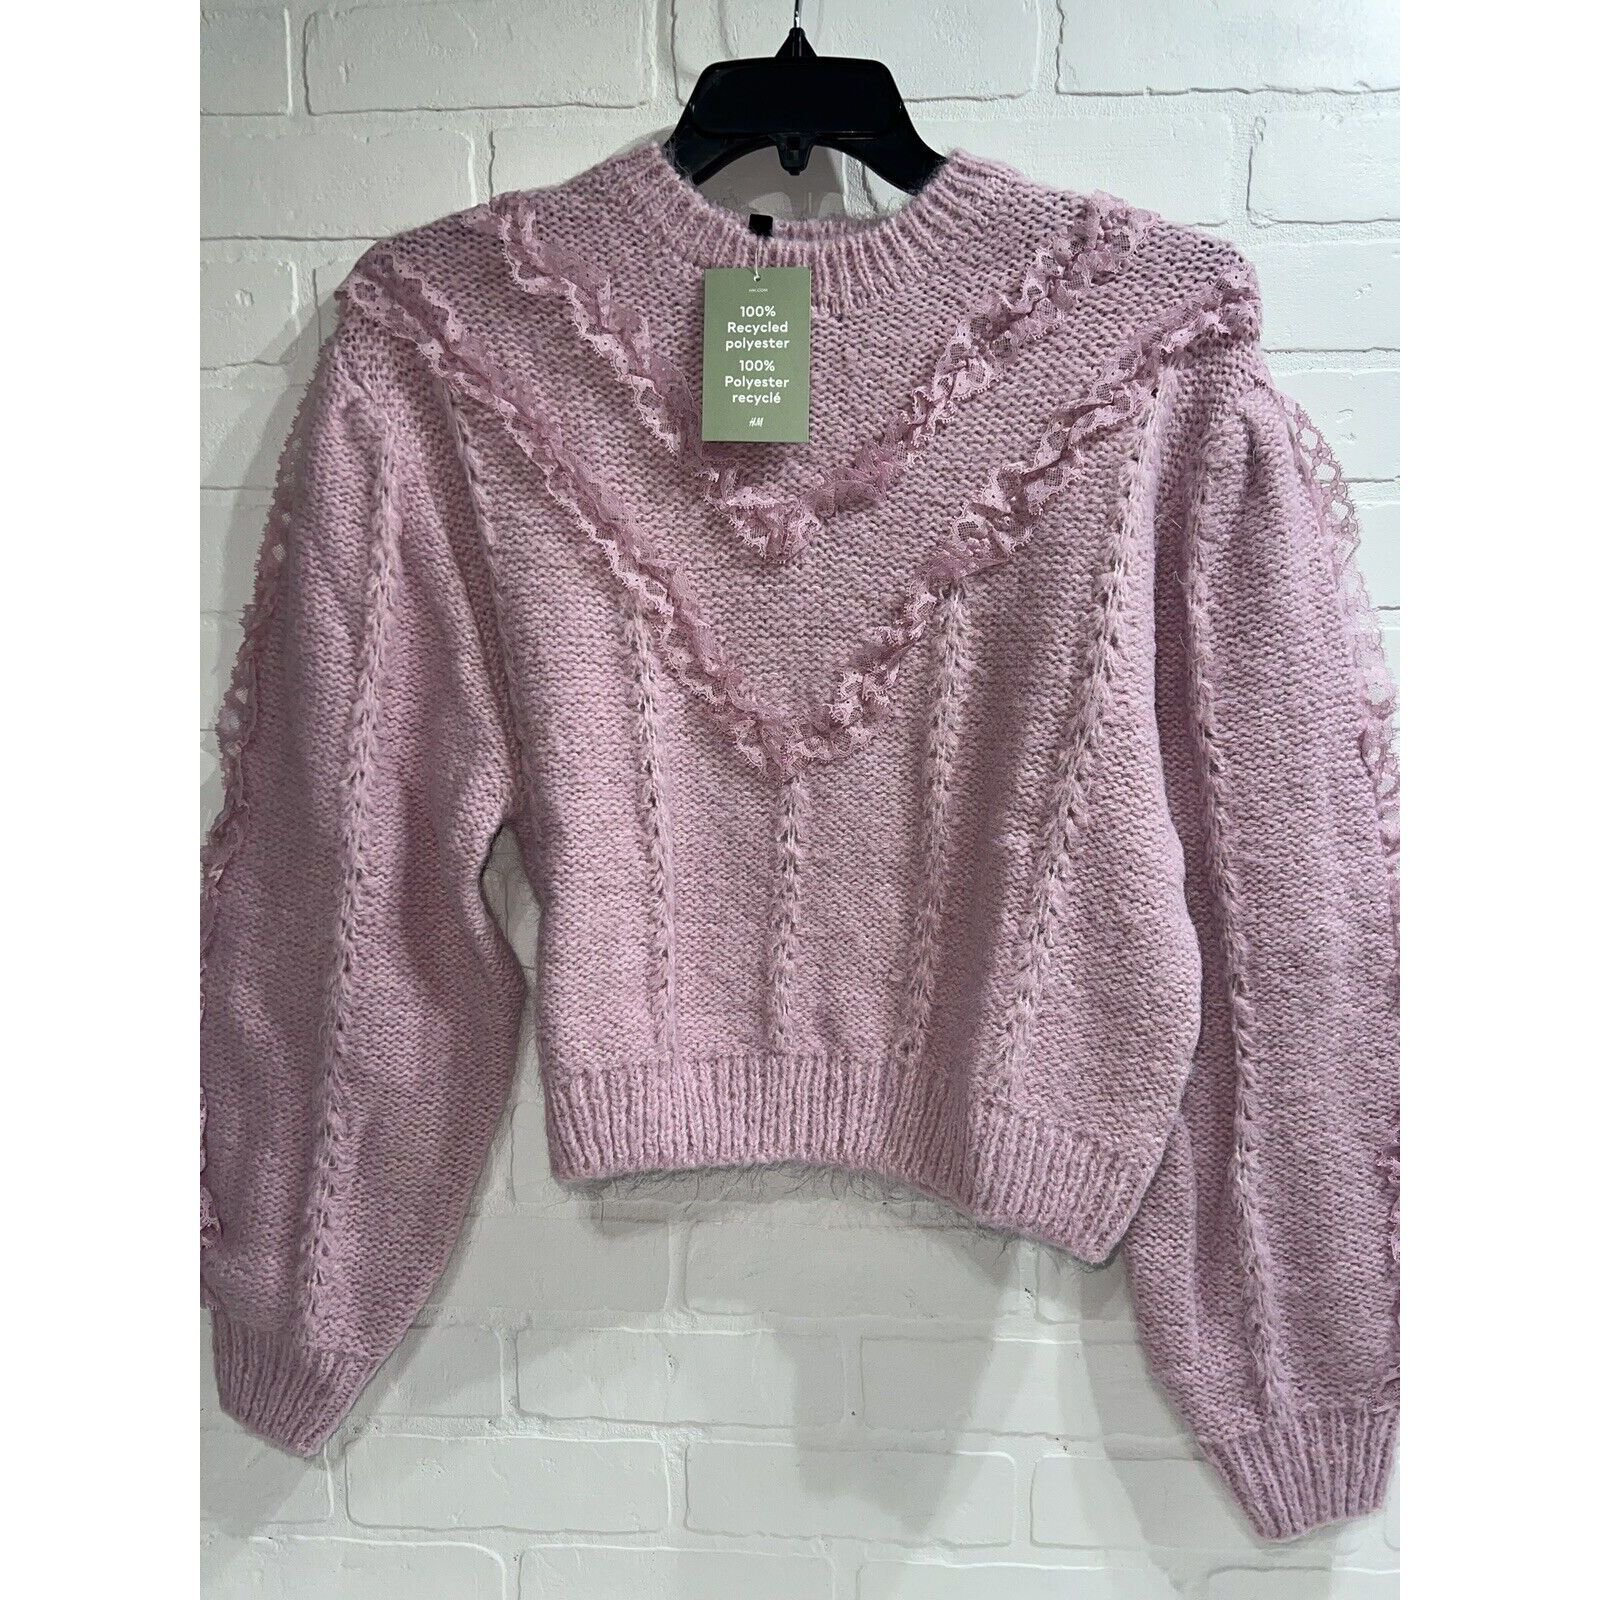 Authentic NWT! Divided by H&M Pink Ruffle Knit Pullover